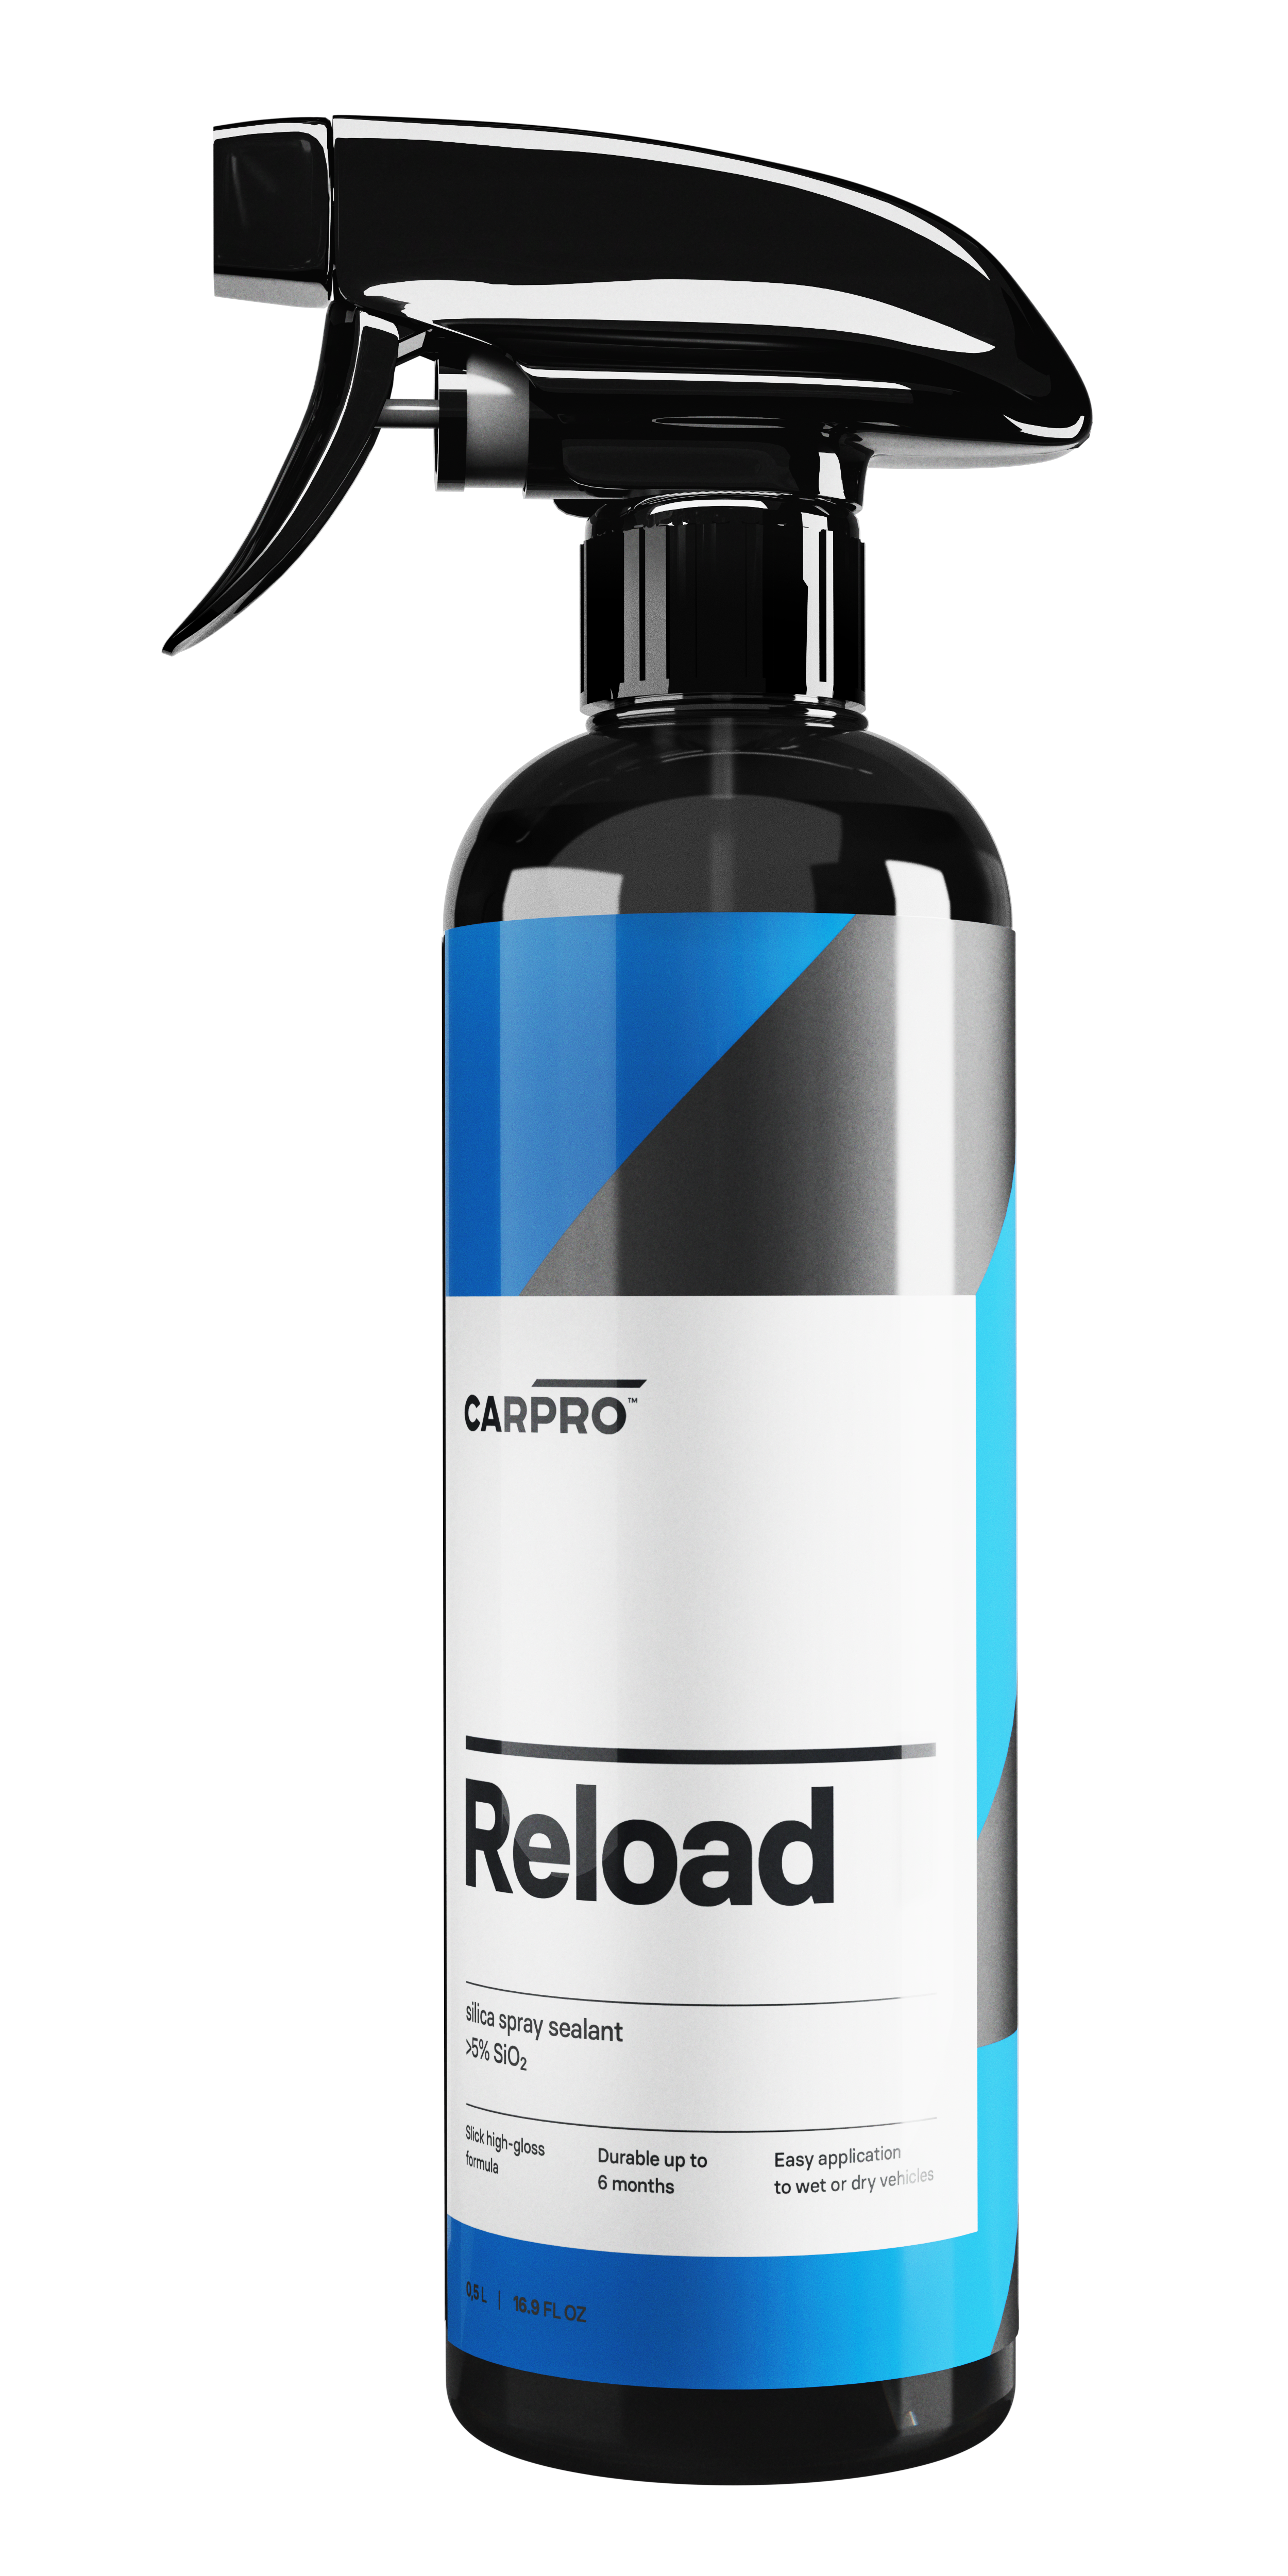 How To Use Carpro Reload on Black car with ppf